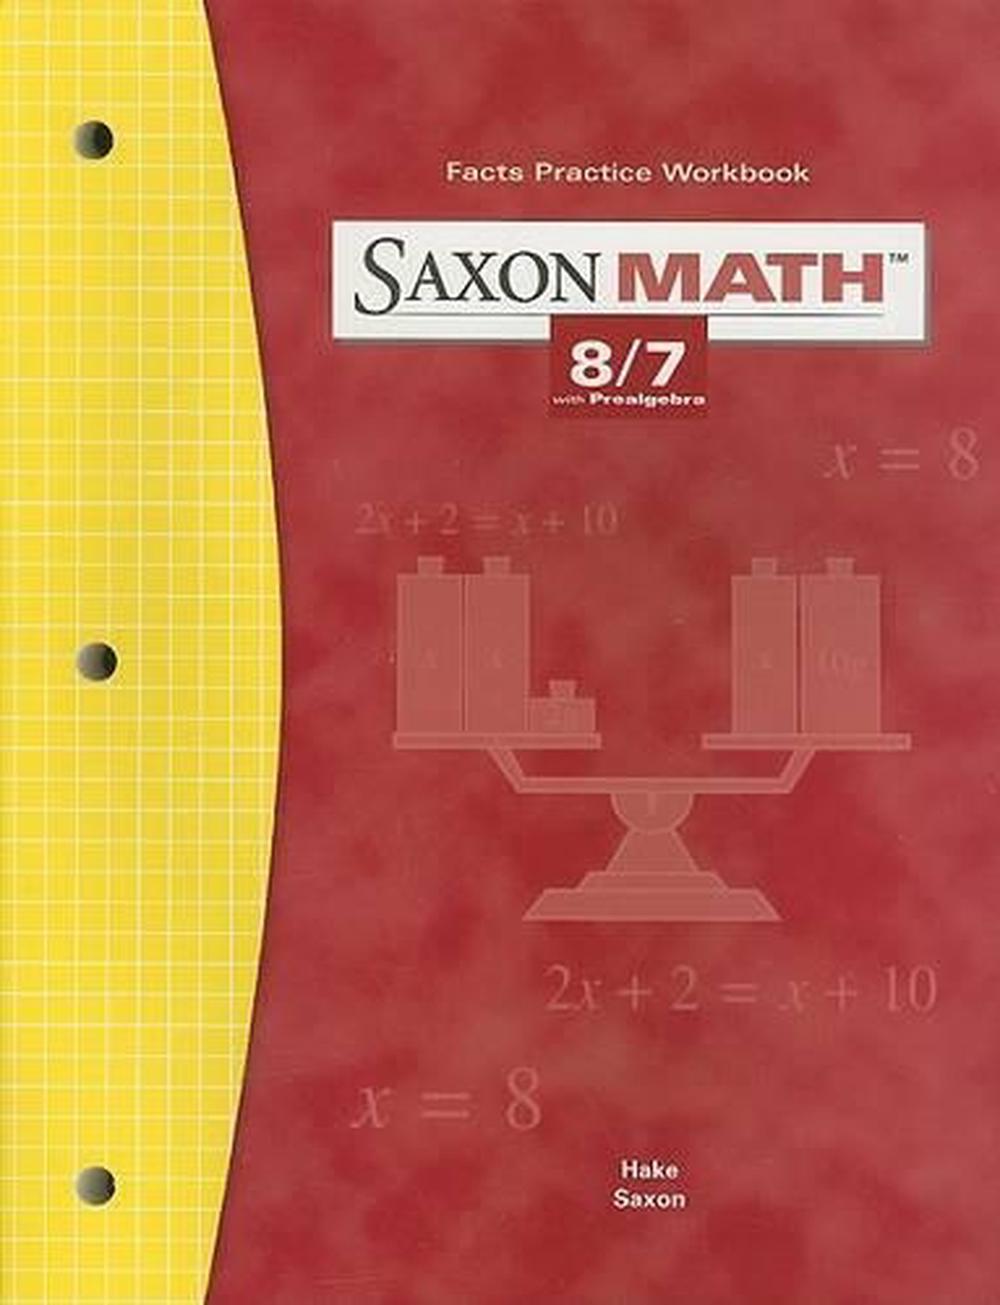 saxon-math-8-7-facts-practice-workbook-with-prealgebra-by-stephen-hake-english-9781591412854